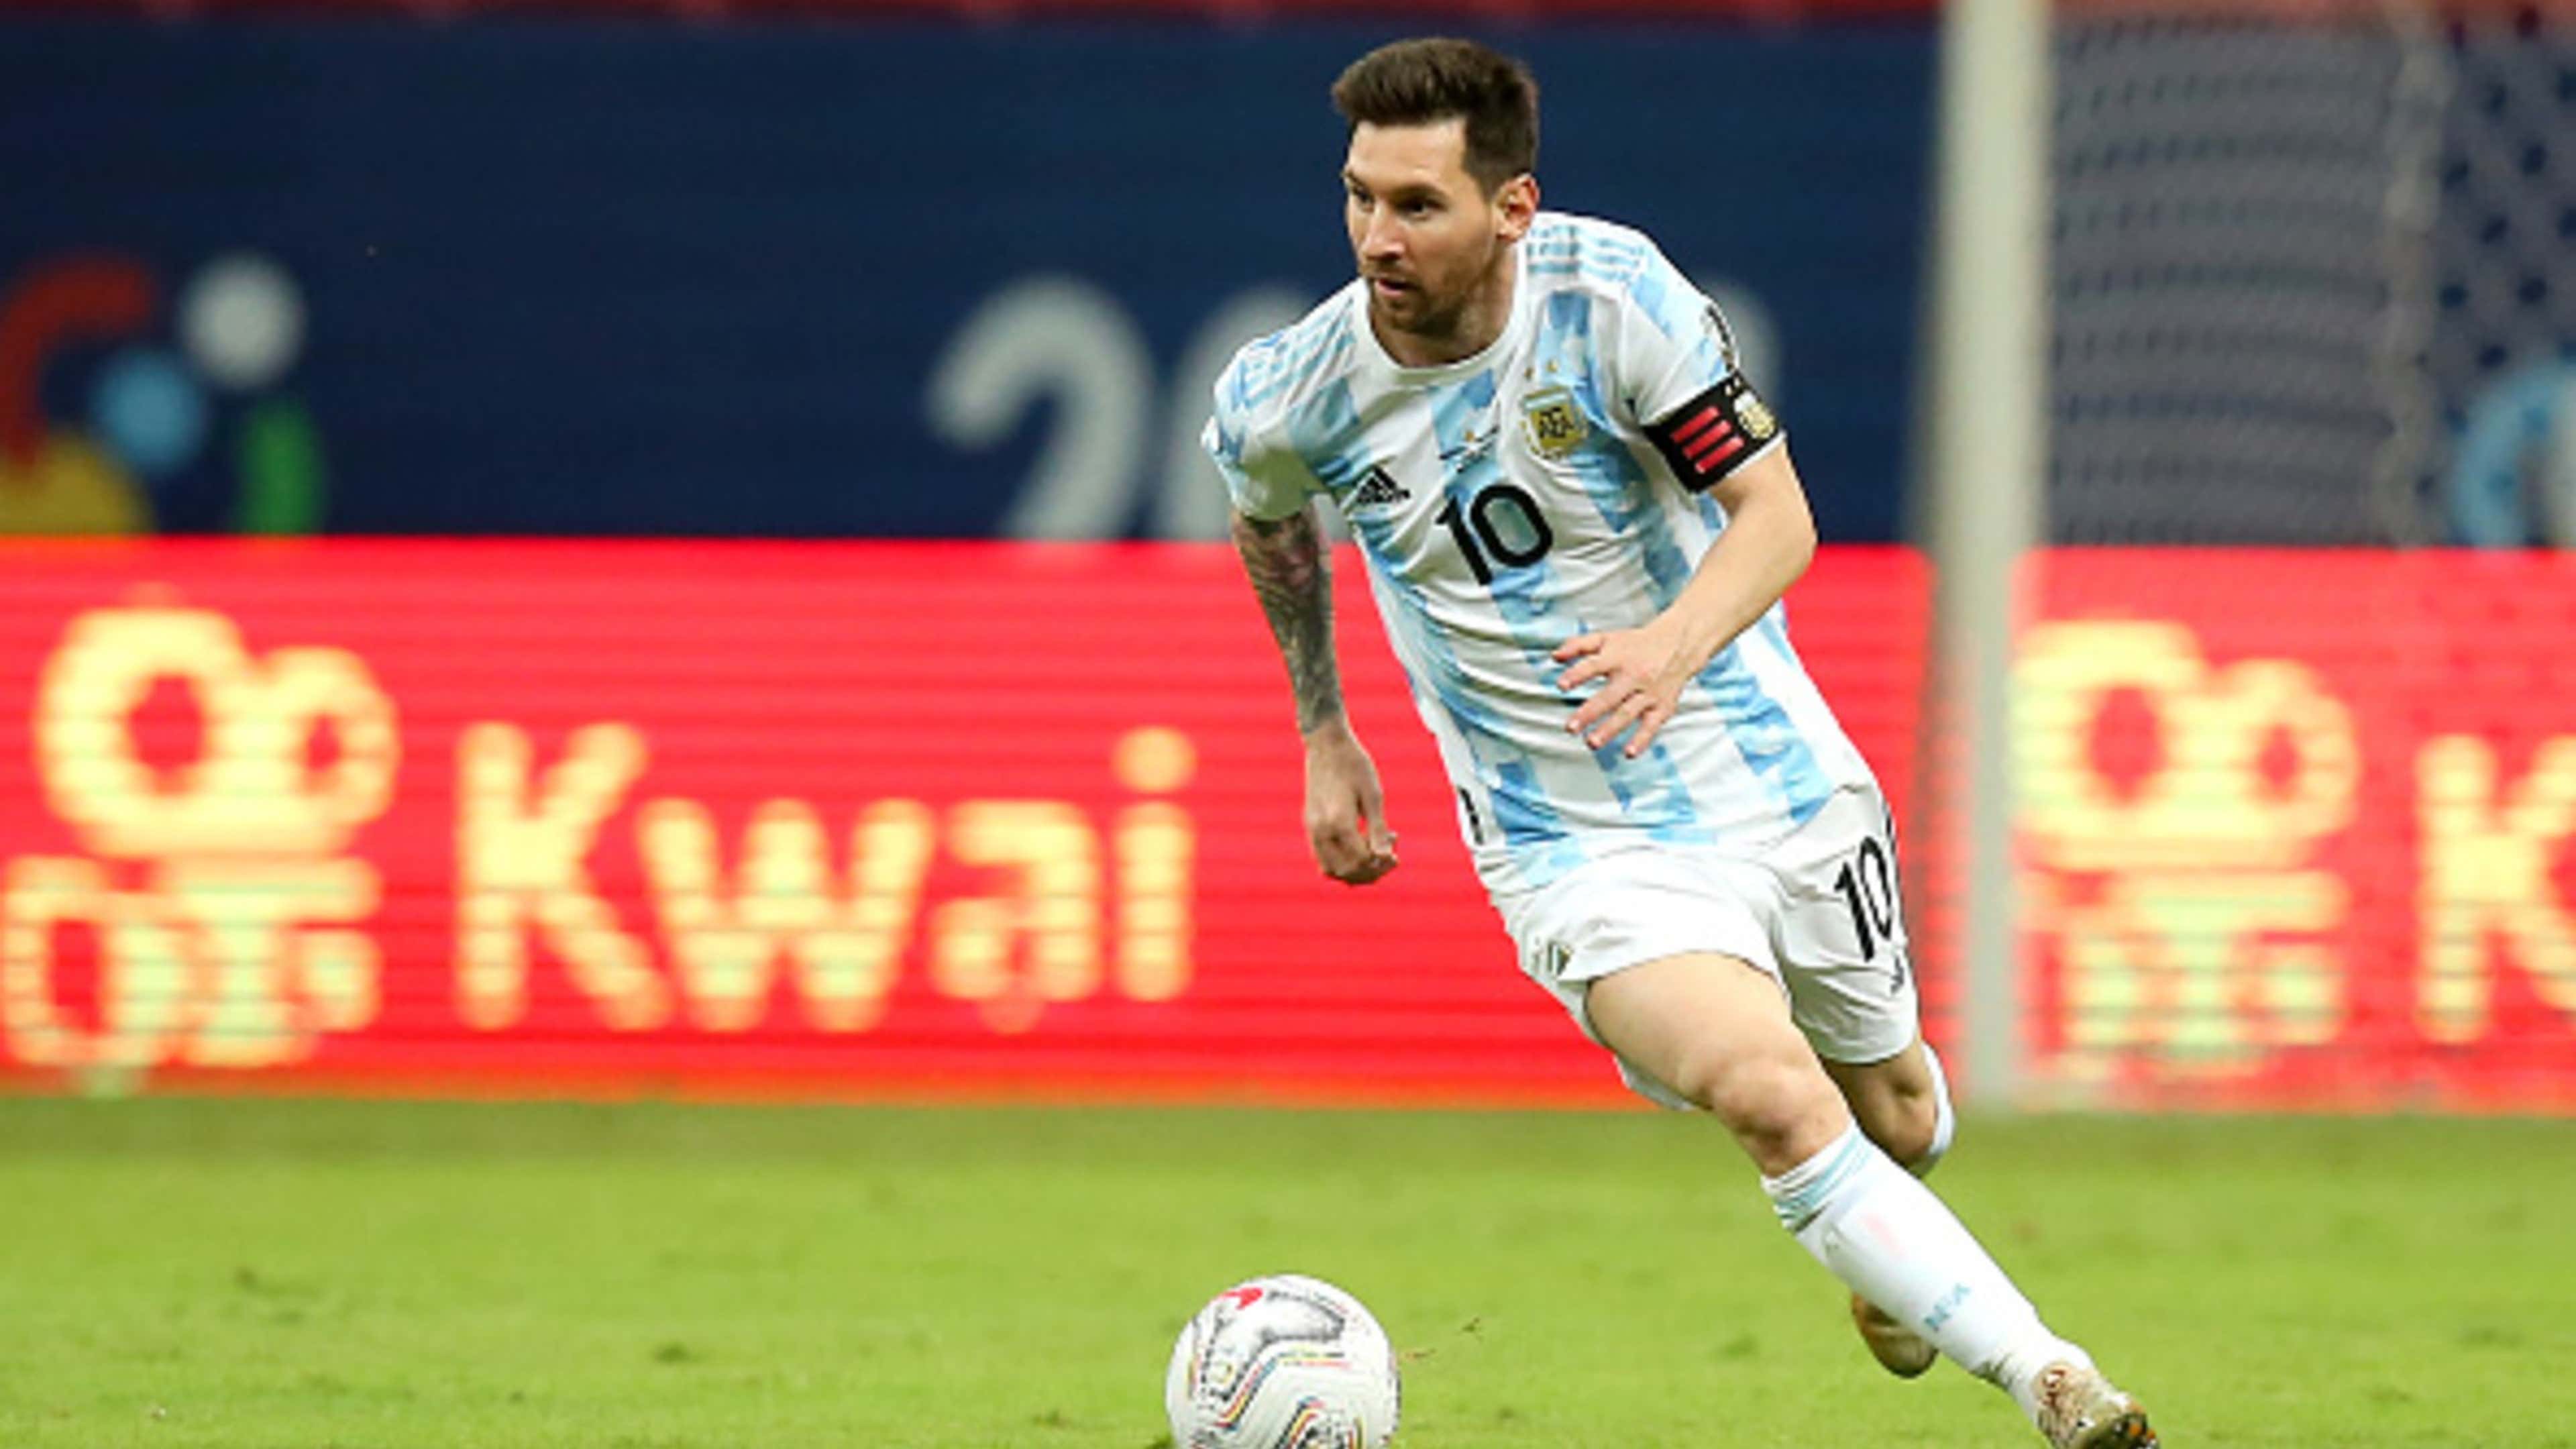 How to watch Bolivia vs Argentina in the Copa America 2021 from India